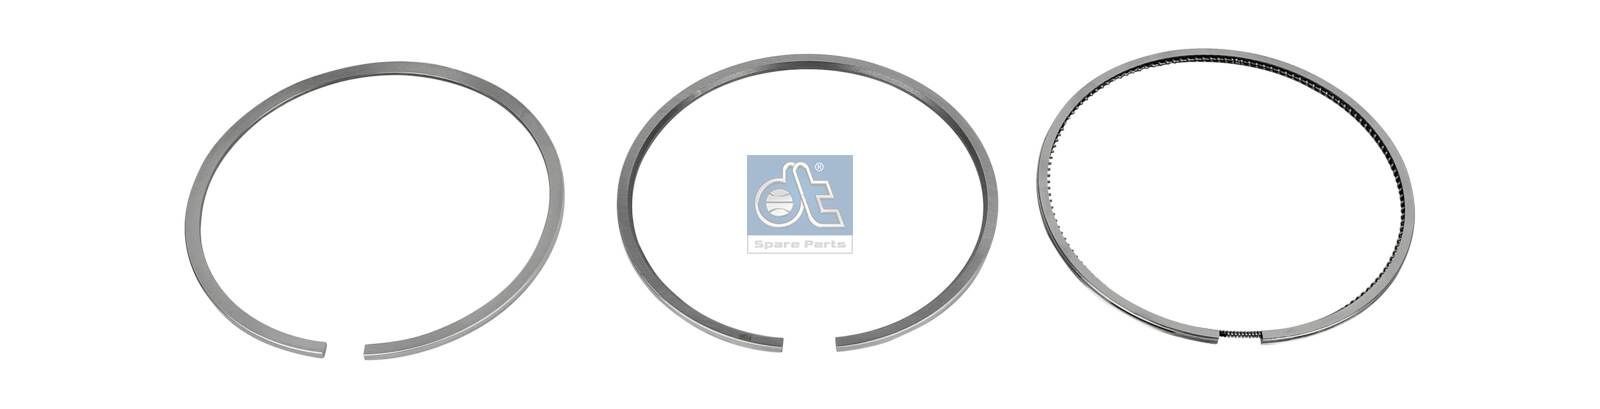 209 57 N0 DT Spare Parts 120mm Piston Ring Set 6.91175 buy